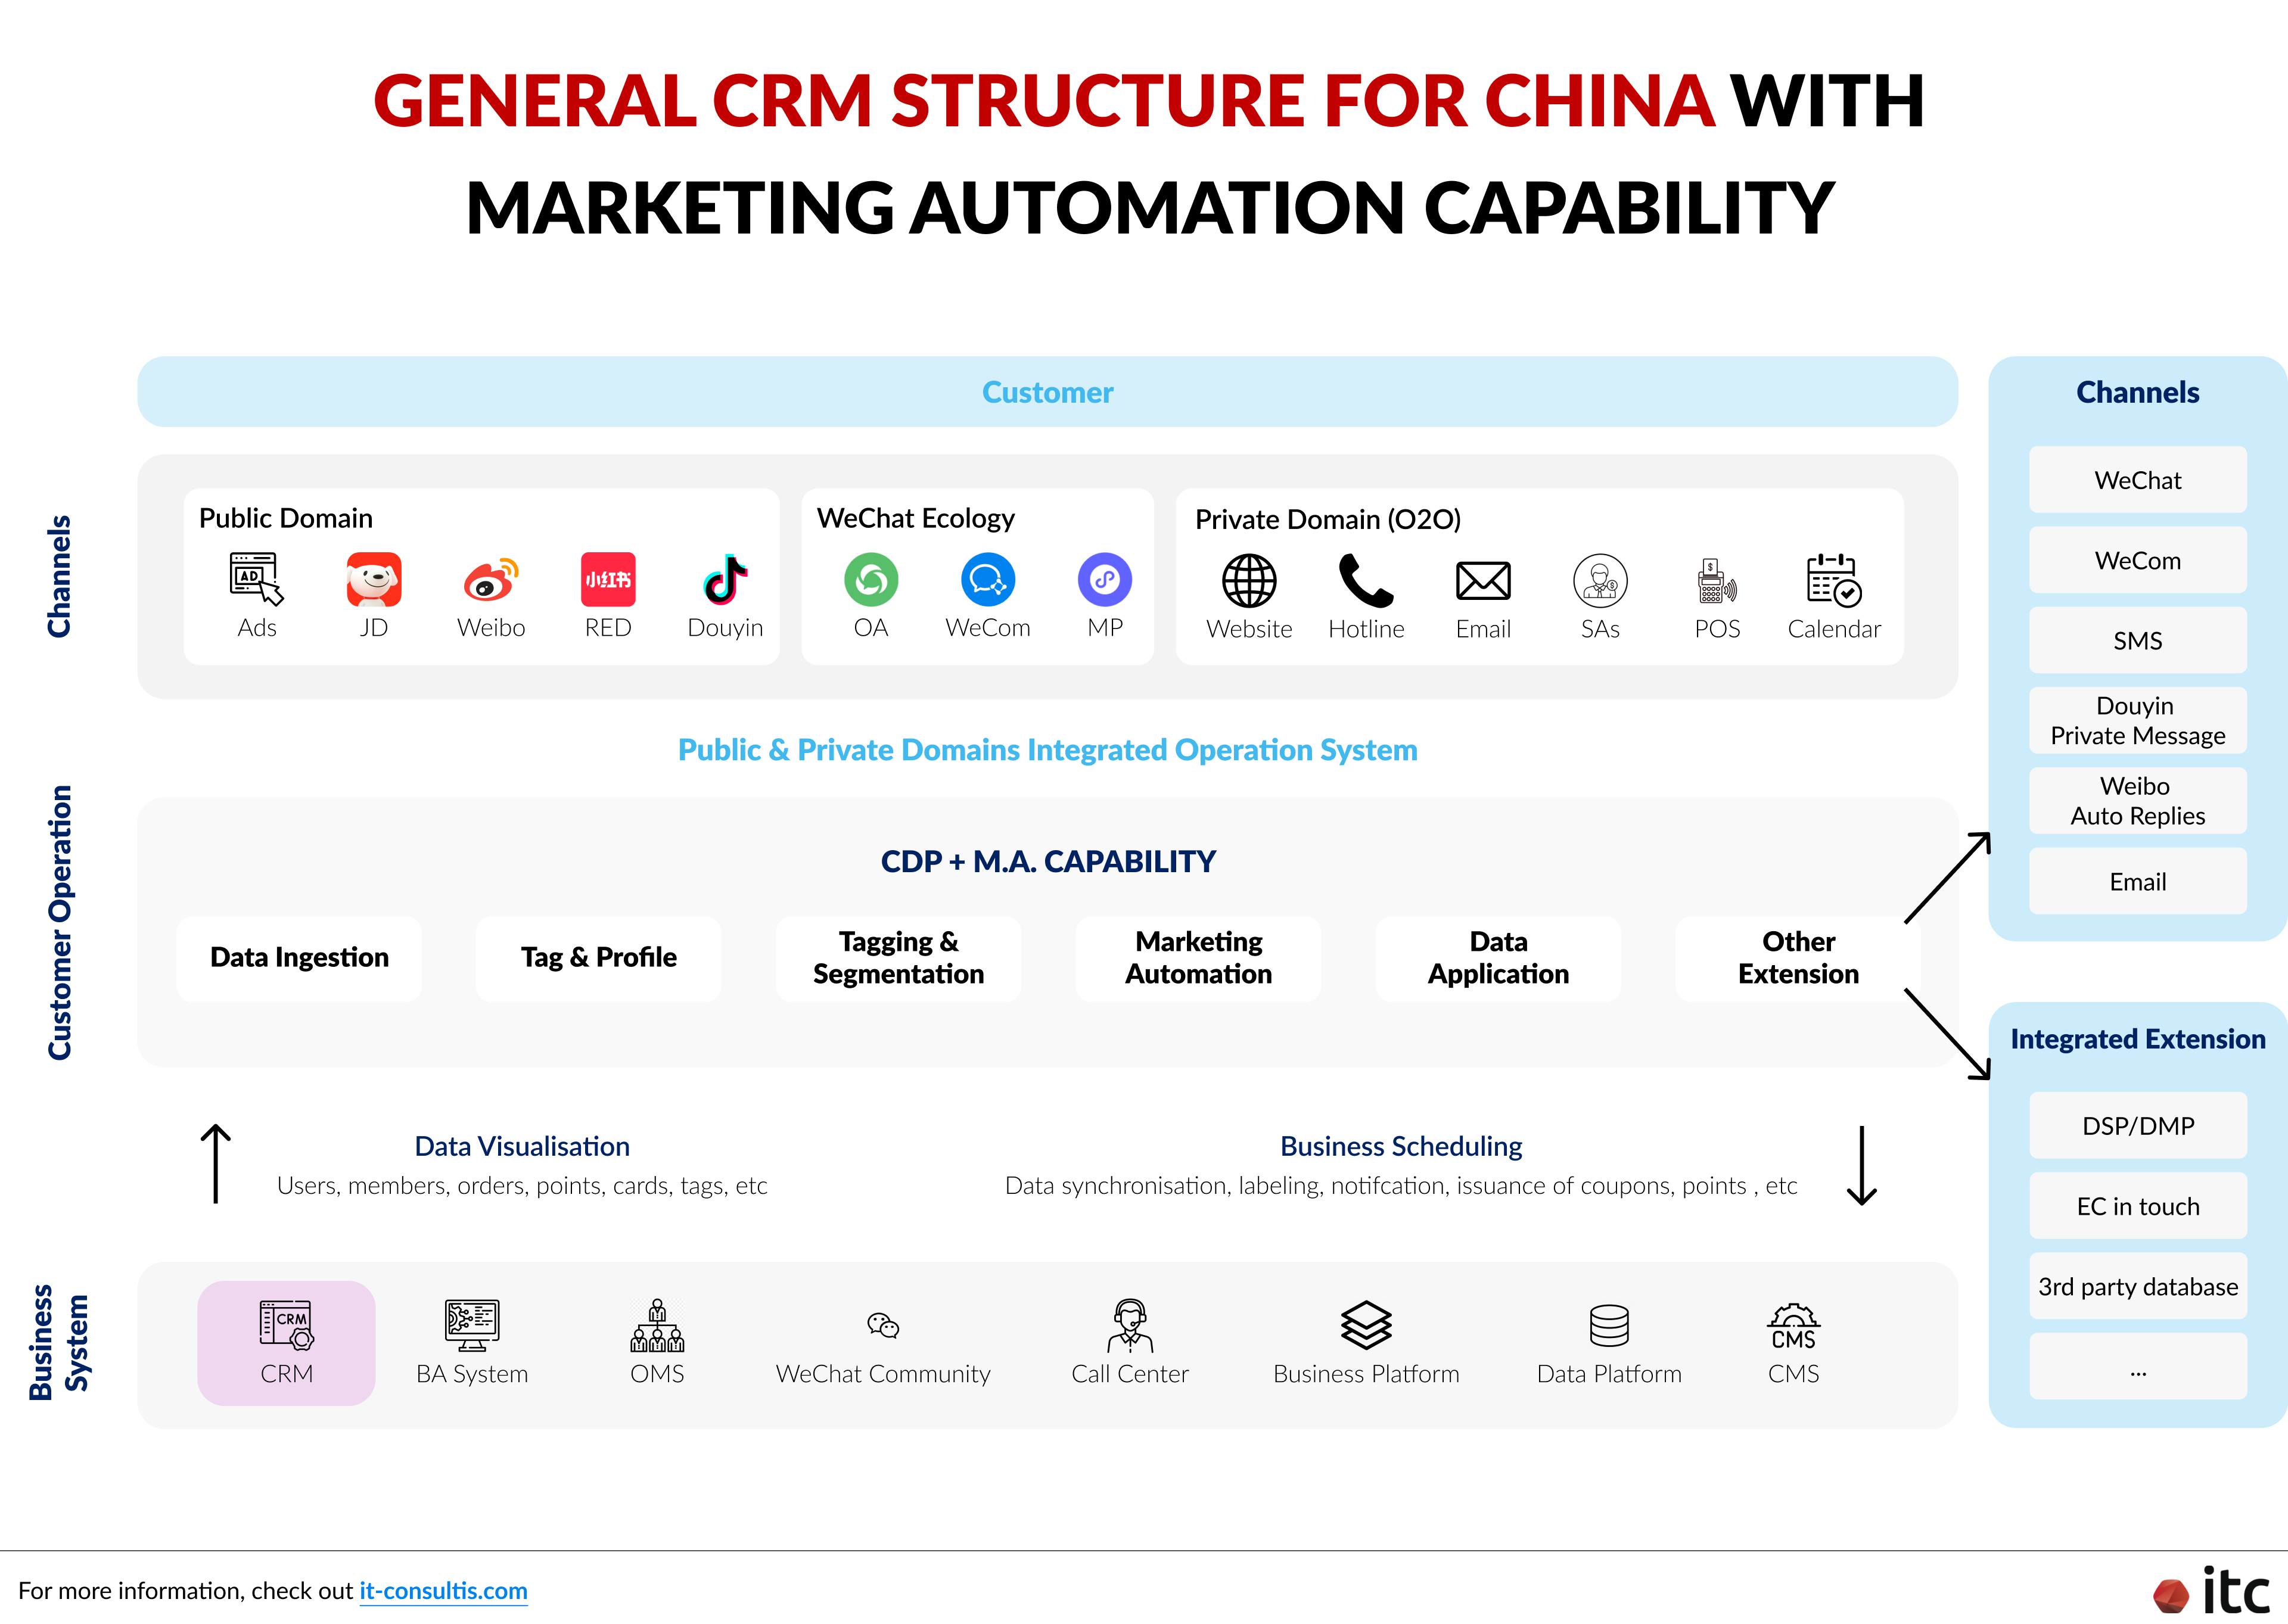 General CRM structure for China with Marketing Automation capability